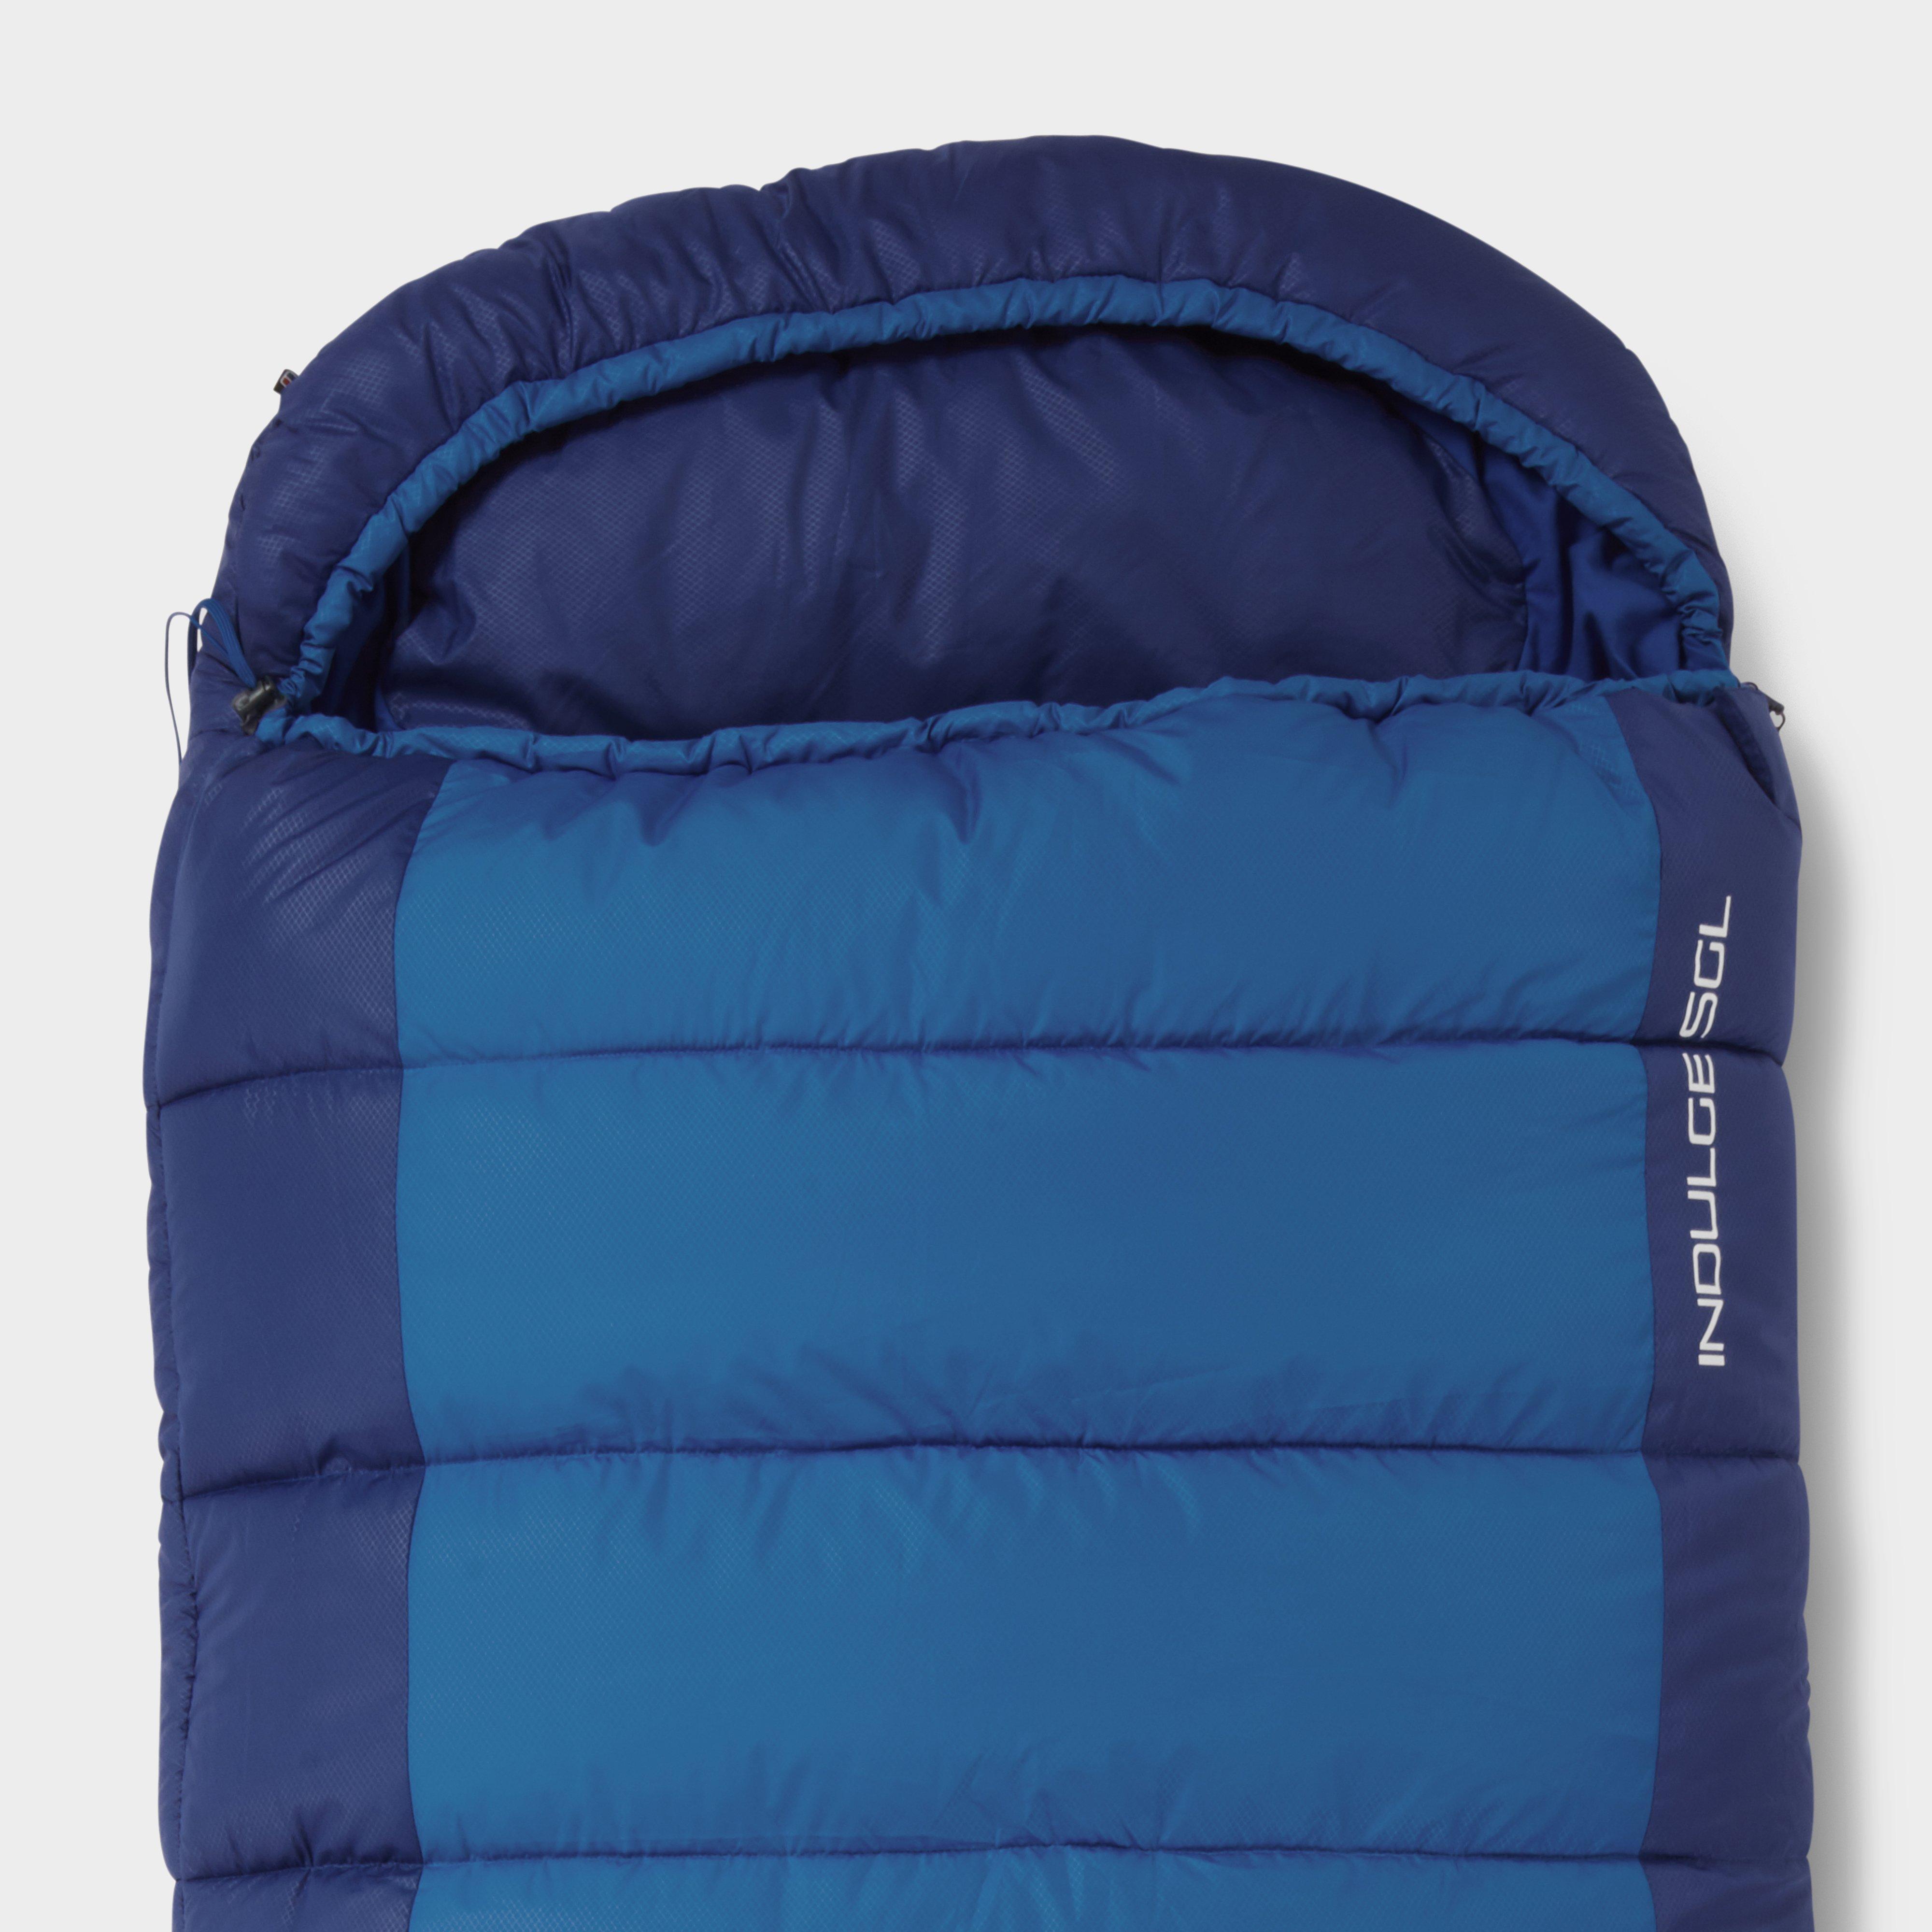 Berghaus Indulge Sleeping Bag | Tent Buyer – Compare tent prices & save